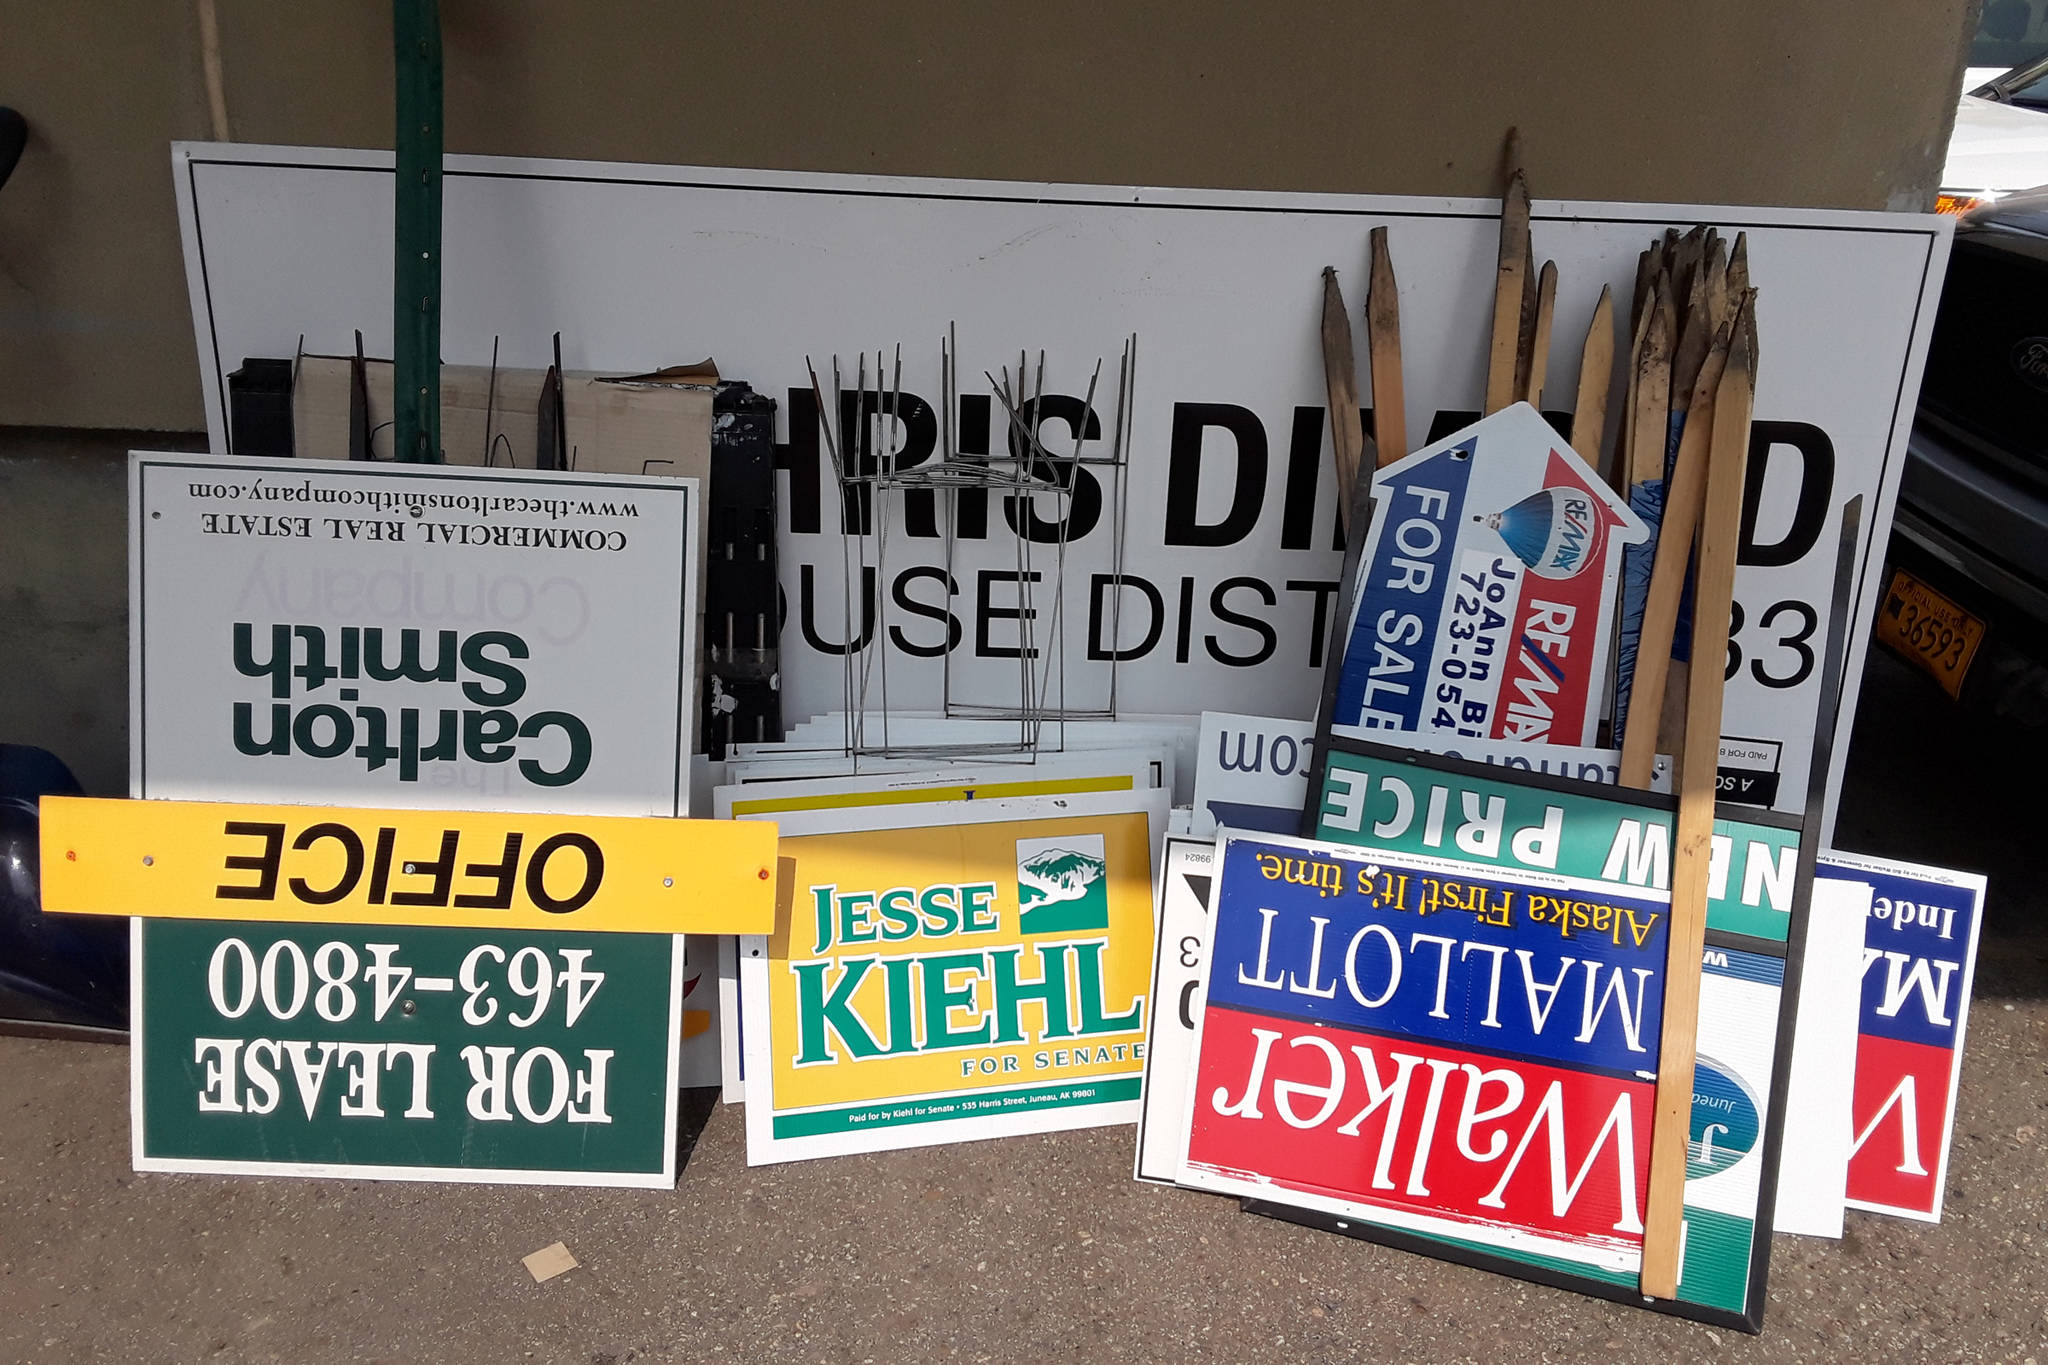 <span class="neFMT neFMT_PhotoCredit">Courtesy photo</span>                                A collection of signs confiscated in Juneau is seen at an Alaska Department of Transportation and Public Facilities facility on July 24, 2018 in this image provided by the DOT.